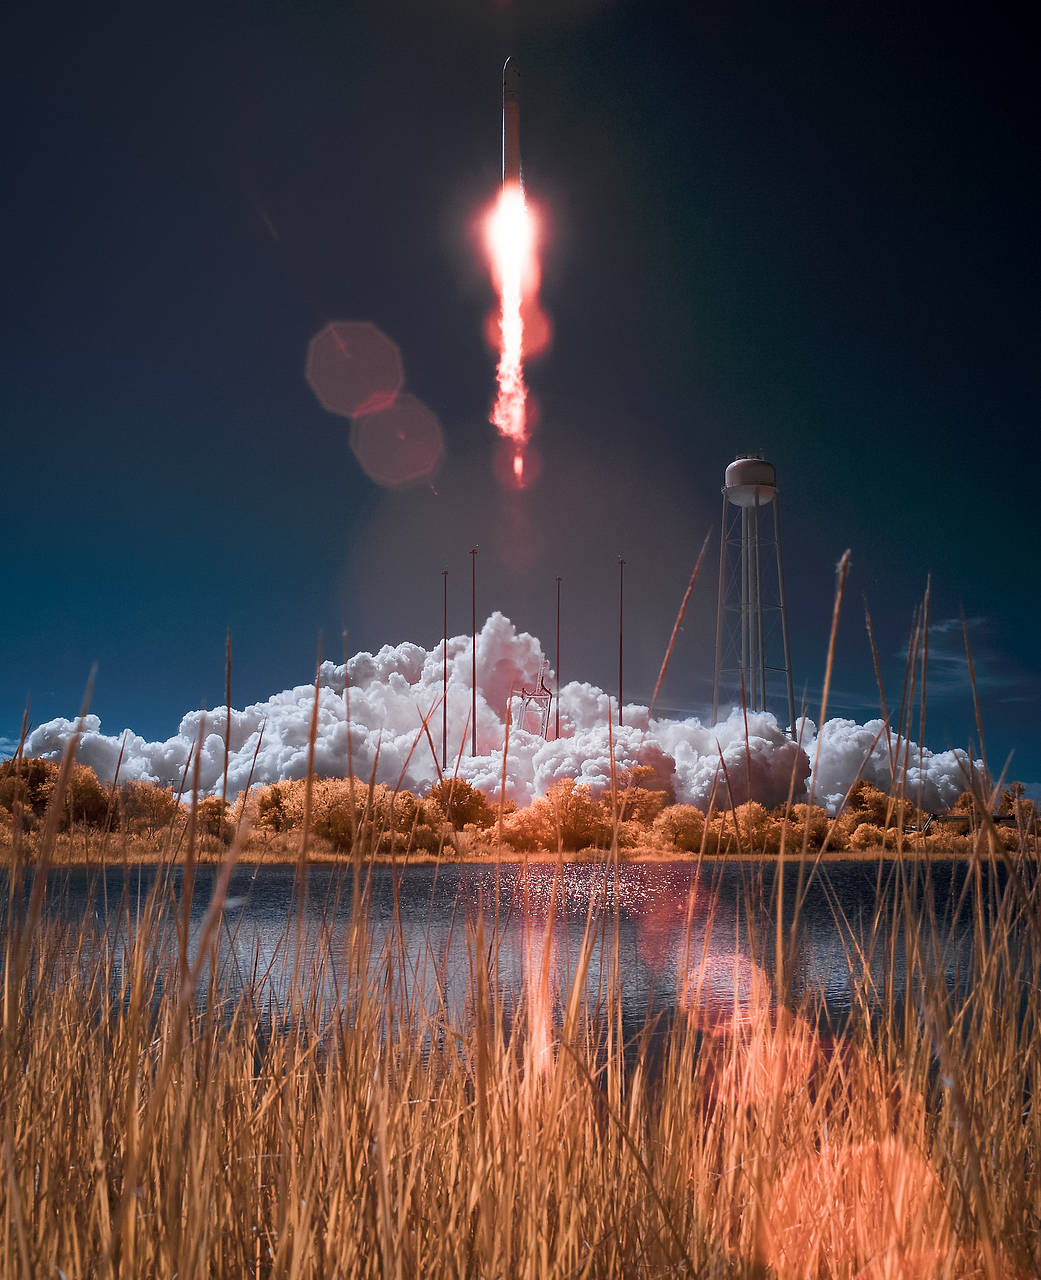 The Orbital Sciences Corporation Antares rocket, with the Cygnus cargo spacecraft aboard, is seen in this false color infrared i